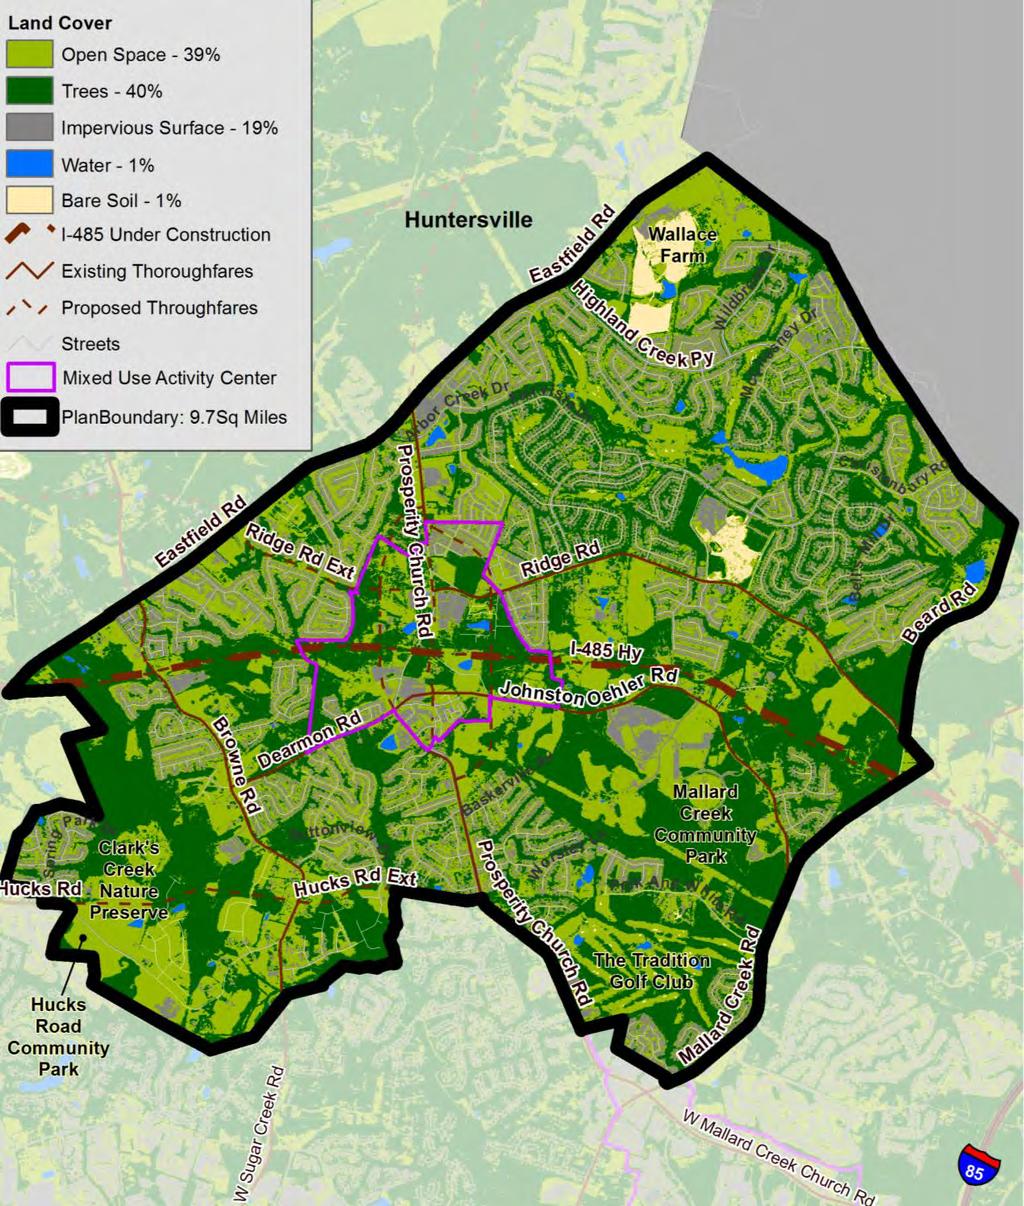 Tree Canopy Establish tree canopy goals for the plan area to support